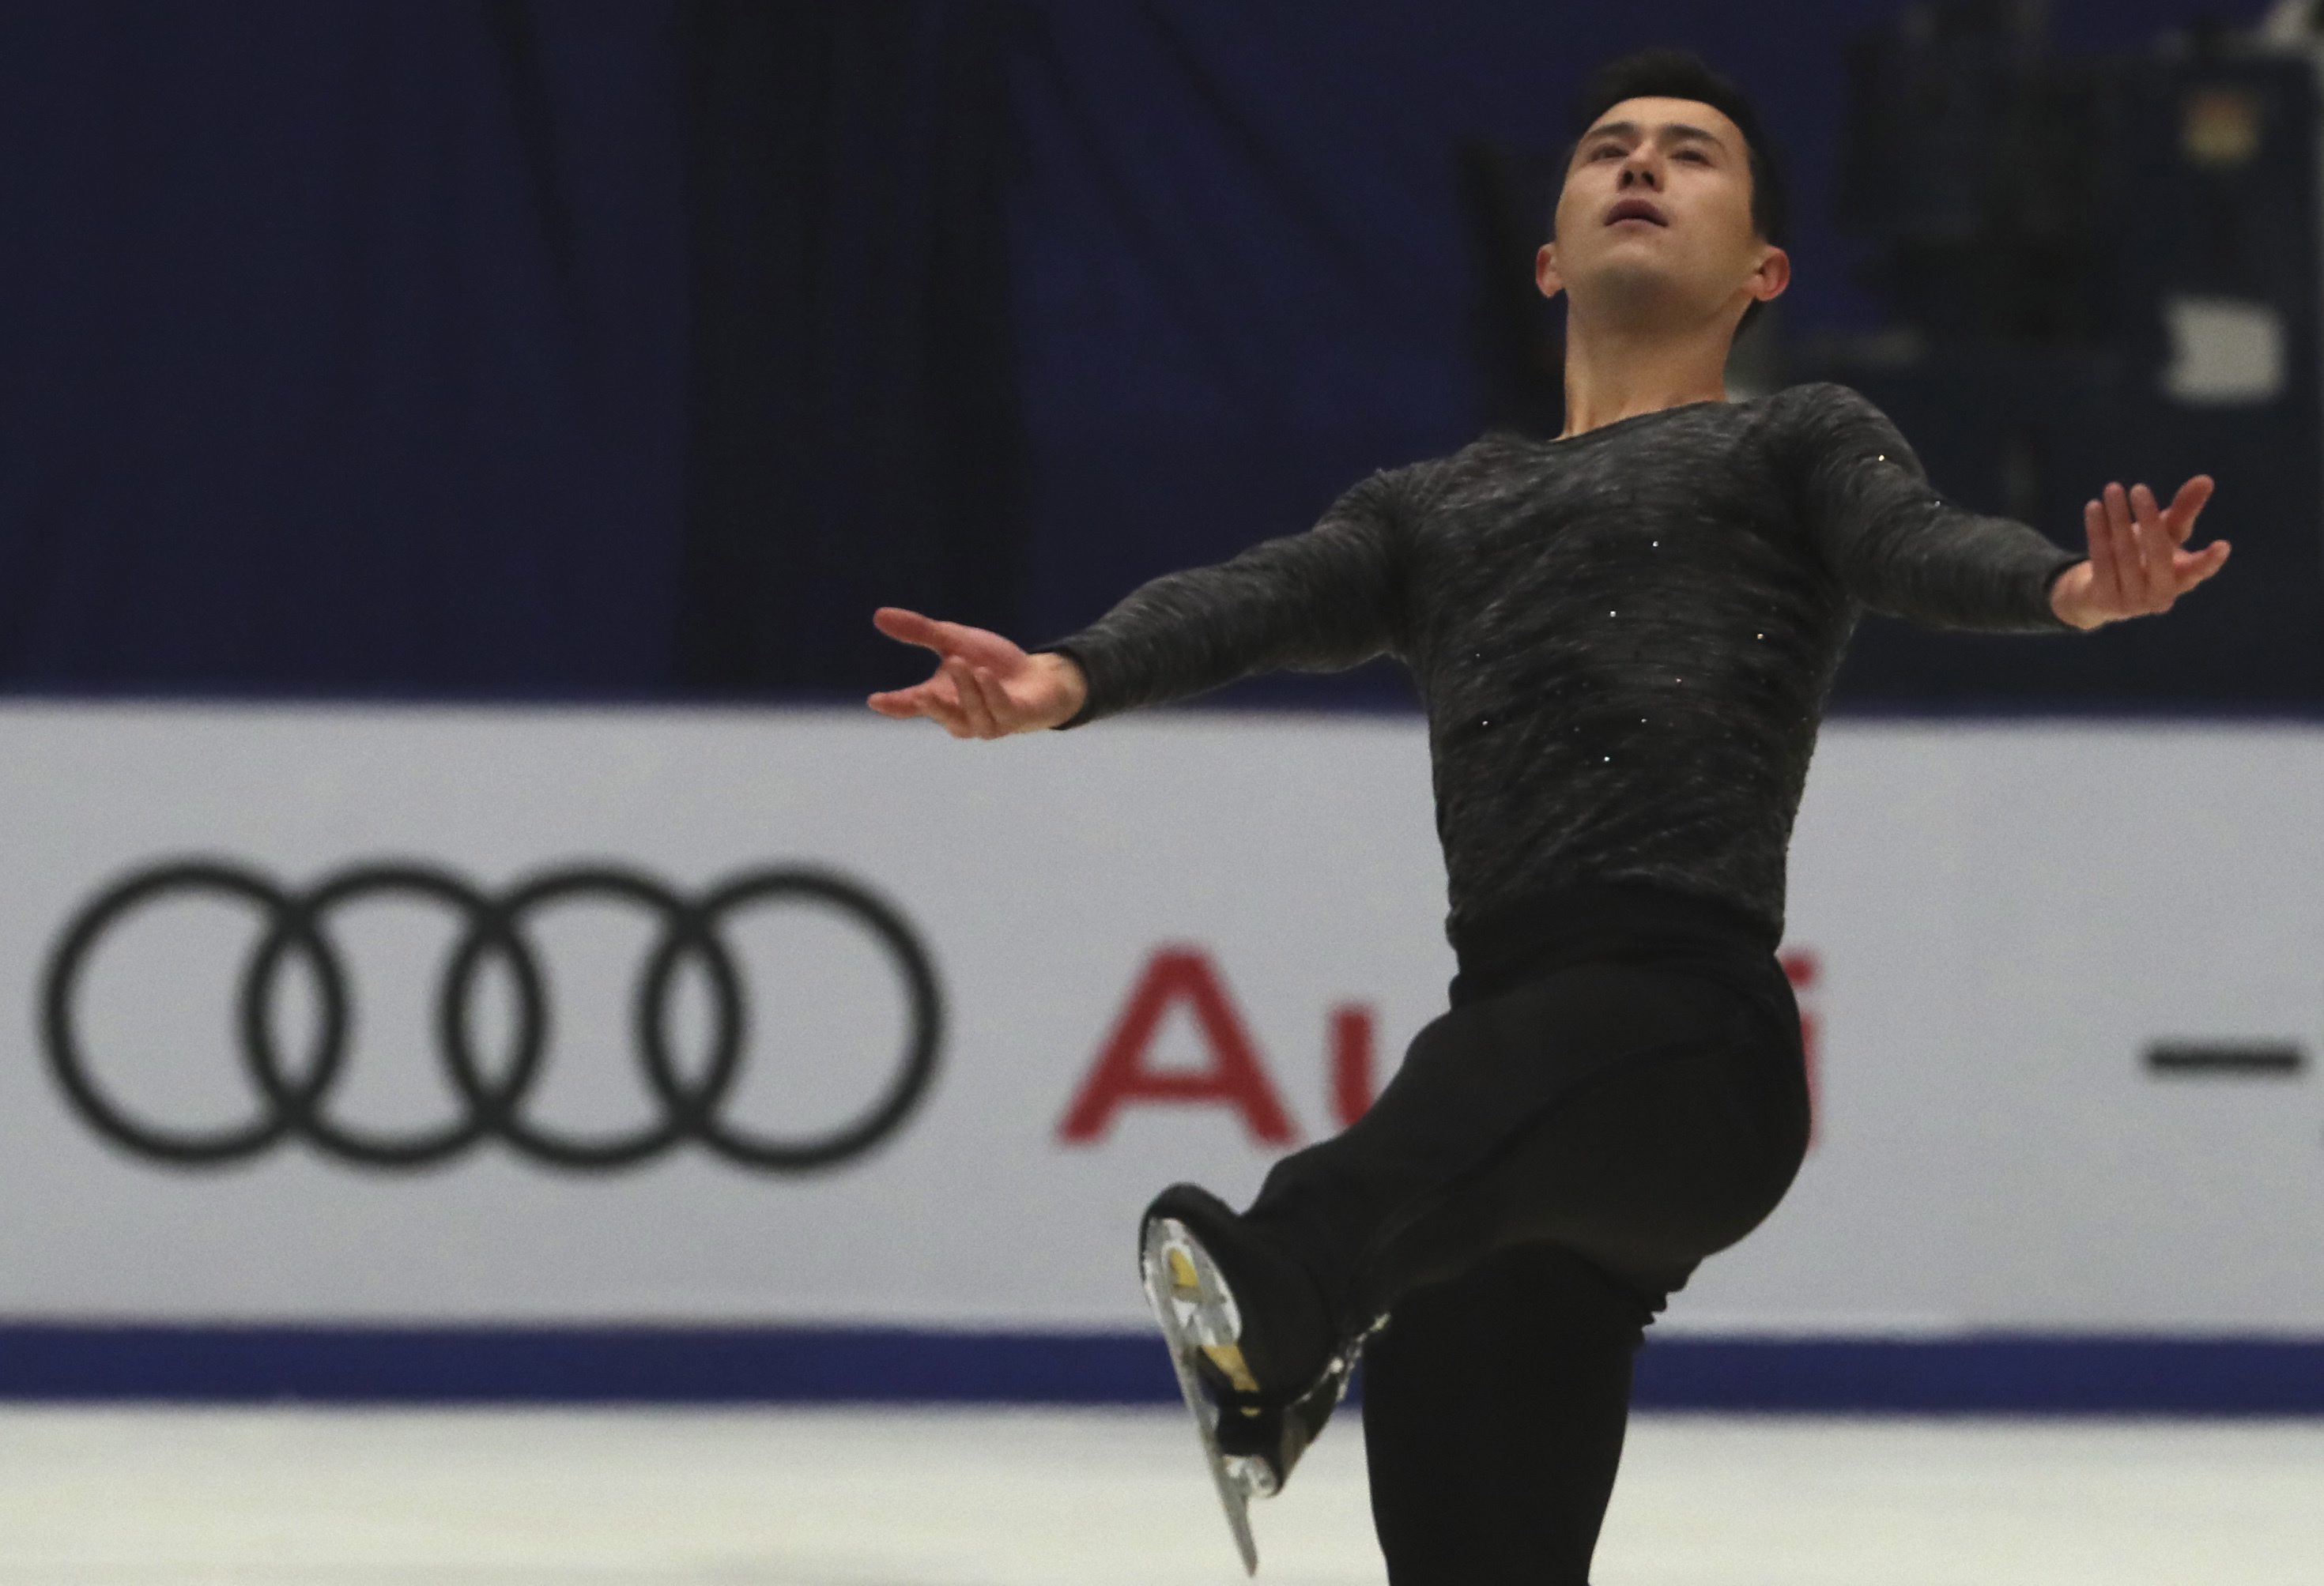 Patrick Chan of Canada competes in the Mens Free Skating event of the Audi Cup of China ISU Grand Prix of Figure Skating 2016 held in the Capital Gymnasium in Beijing, China, Saturday, Nov. 19, 2016. (AP Photo/Ng Han Guan)